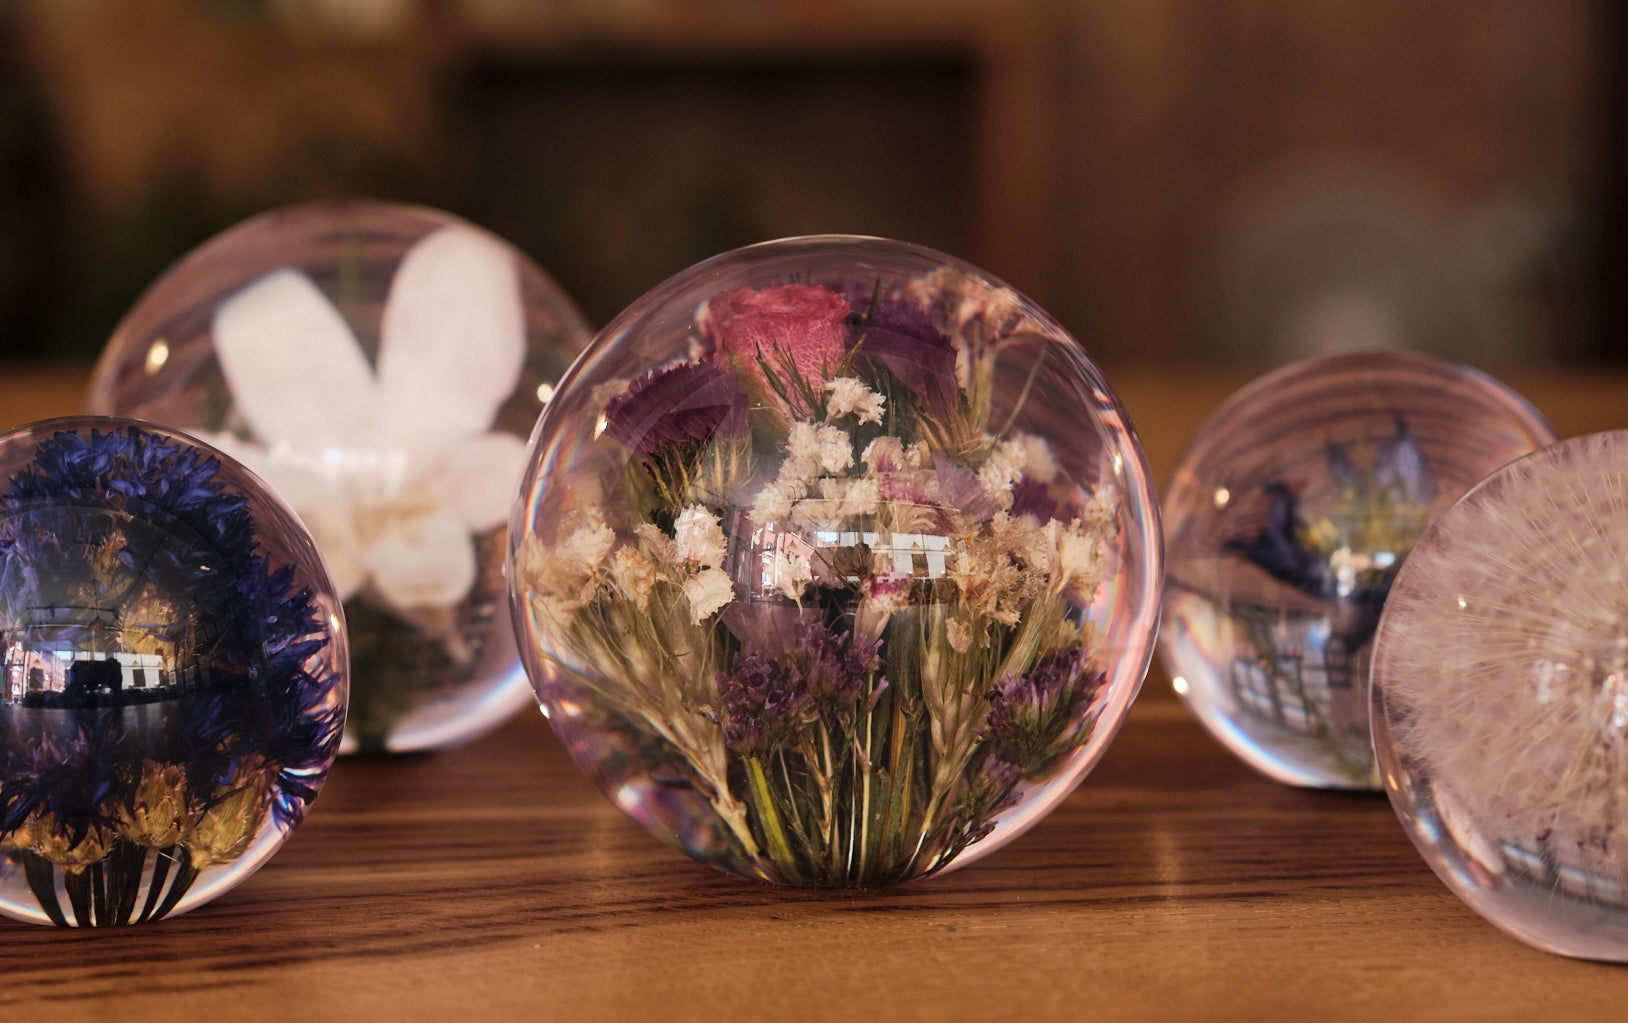 Mixed Flowers Paperweight